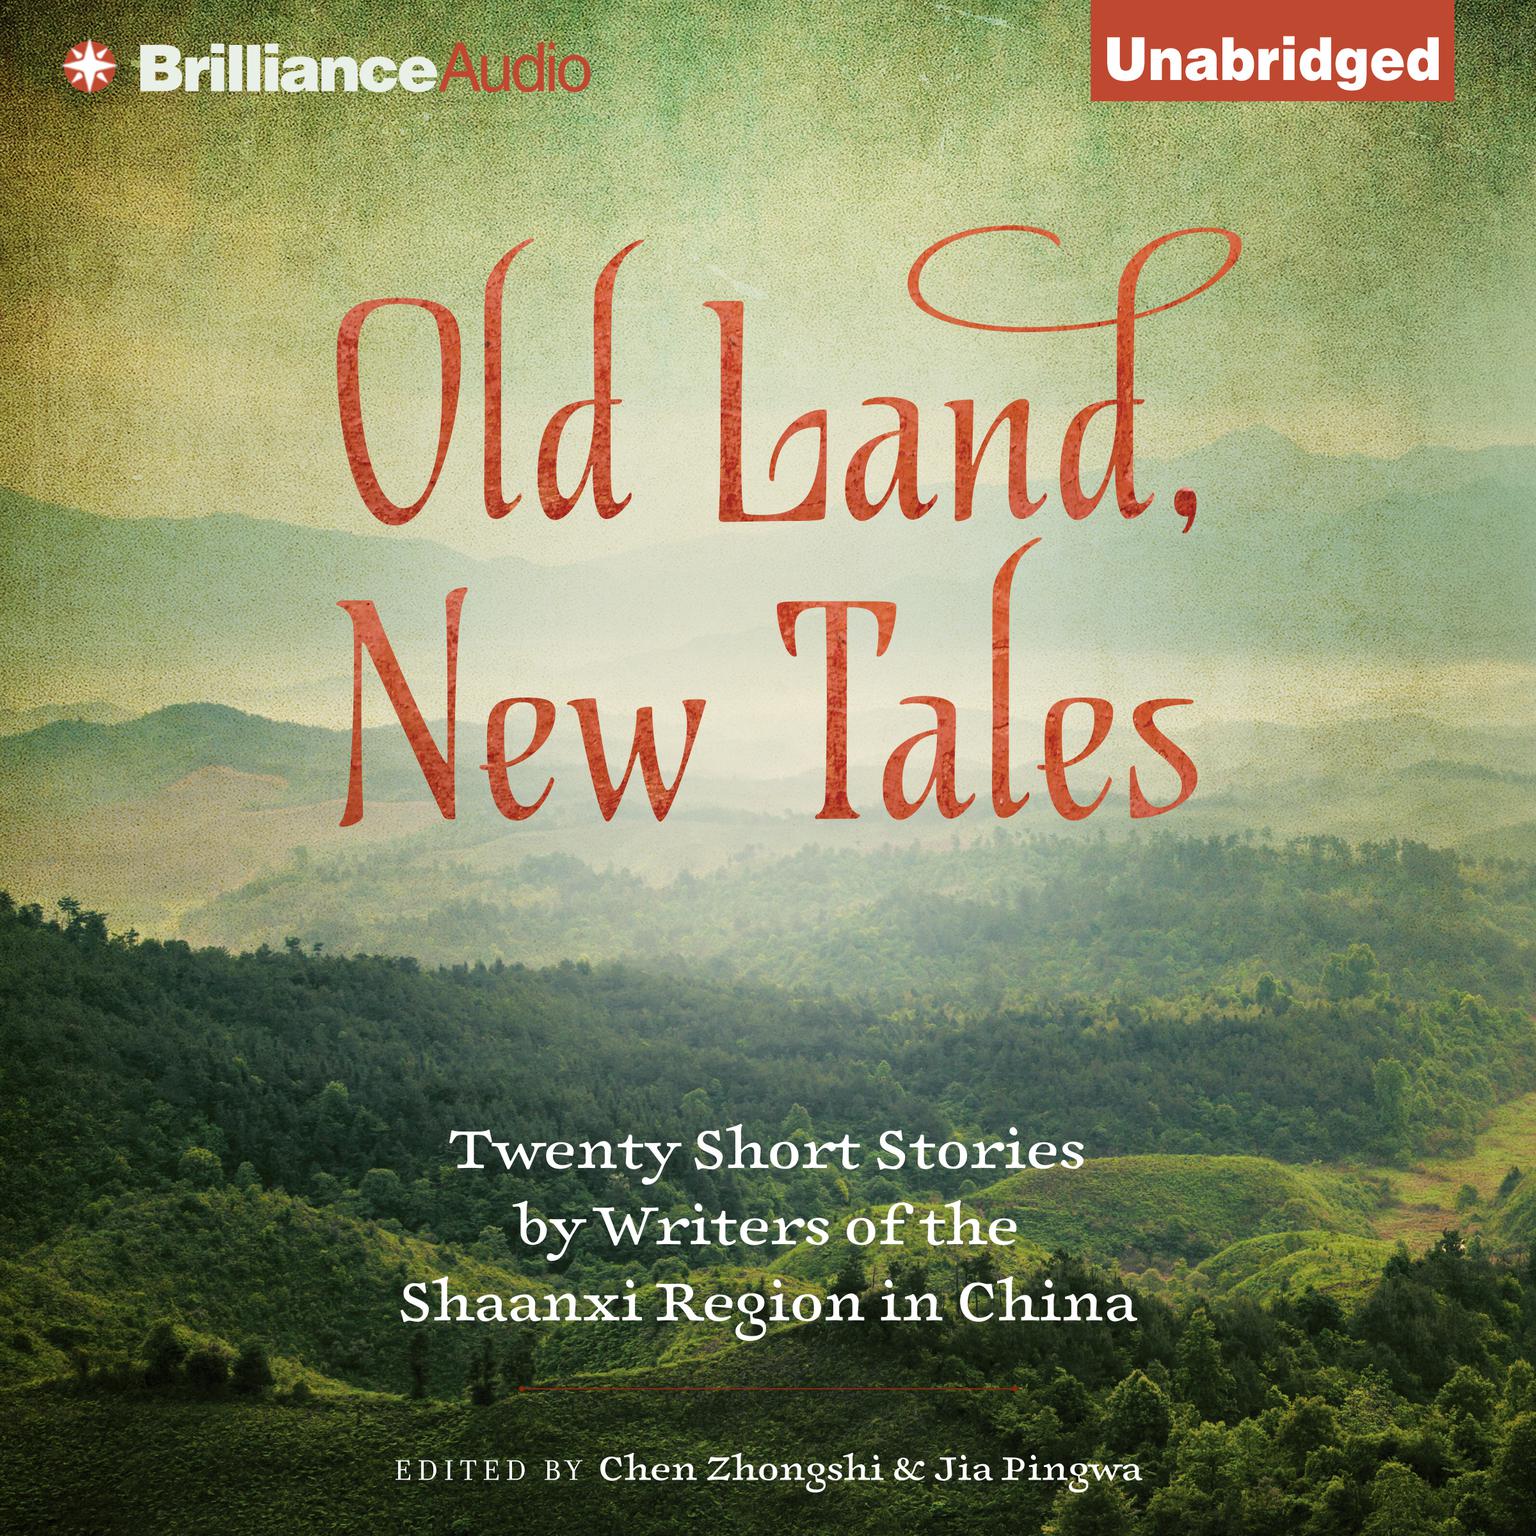 Old Land, New Tales: Twenty Short Stories by Writers of the Shaanxi Region in China Audiobook, by Chen Zhongshi